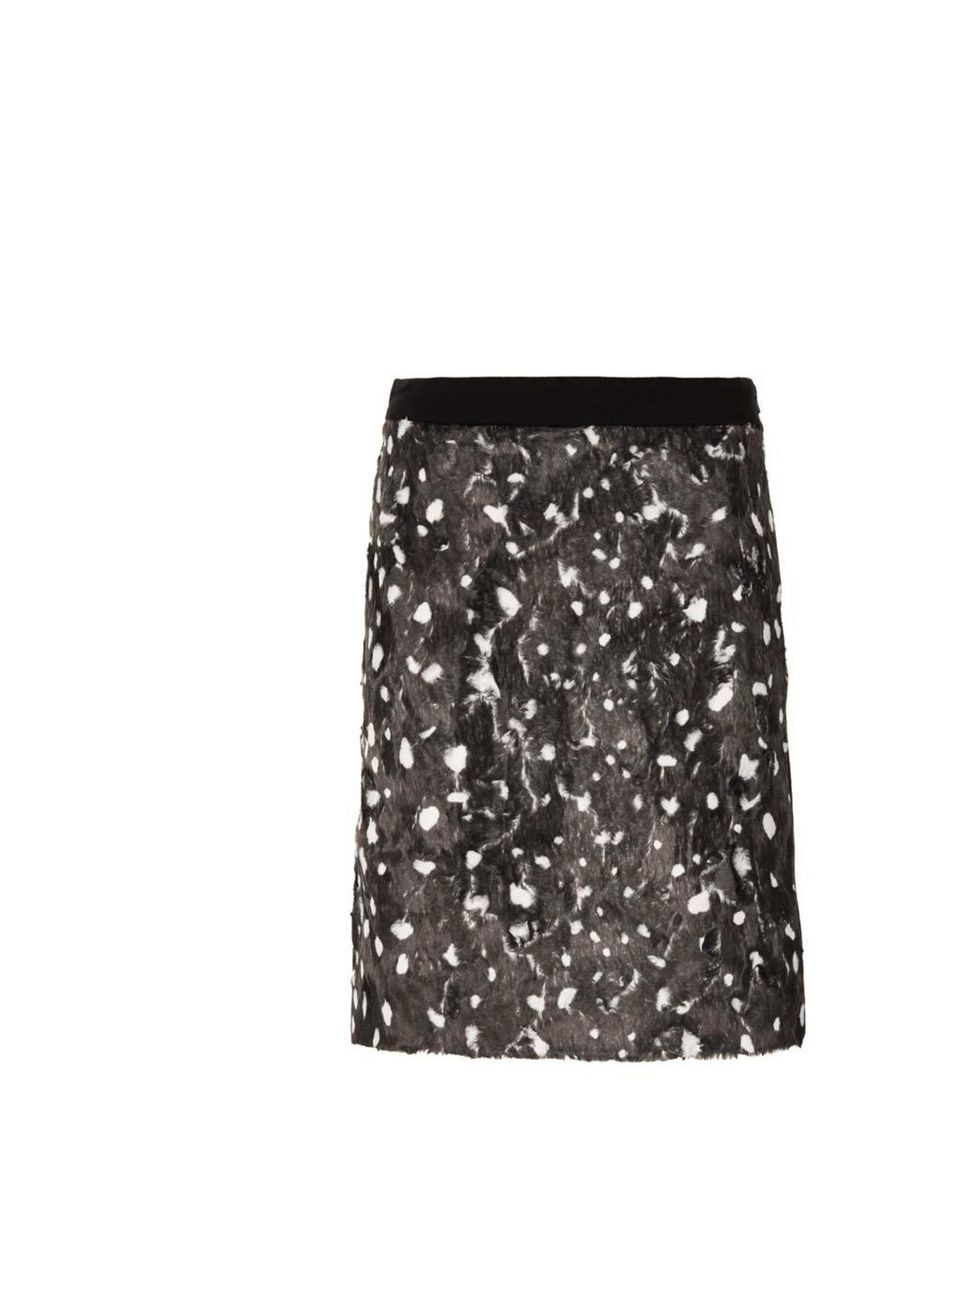 <p>Faux-fur is having a bit of a moment for a/w 2013, and this printed skirt is on Digital Director Phebe Hunnicutt's seasonal shopping list. </p><p><a href="http://www.topshop.com/en/tsuk/product/clothing-427/boutique-440/printed-fur-pencil-skirt-by-bout